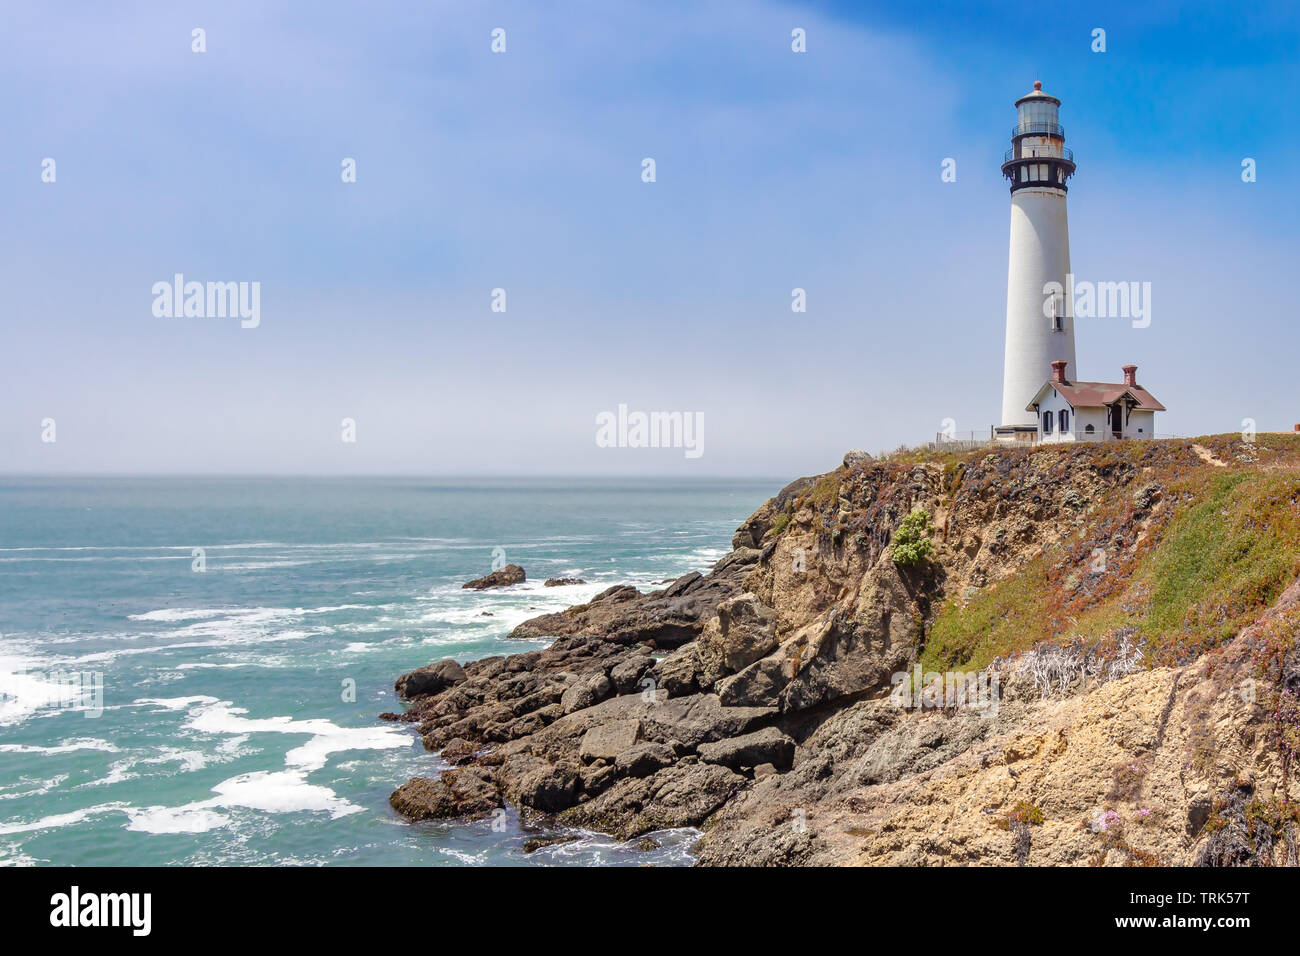 Built in 1871, Pigeon Point Light Station in Pescadero, California is the tallest lighthouse on the western coast of the United States. Stock Photo